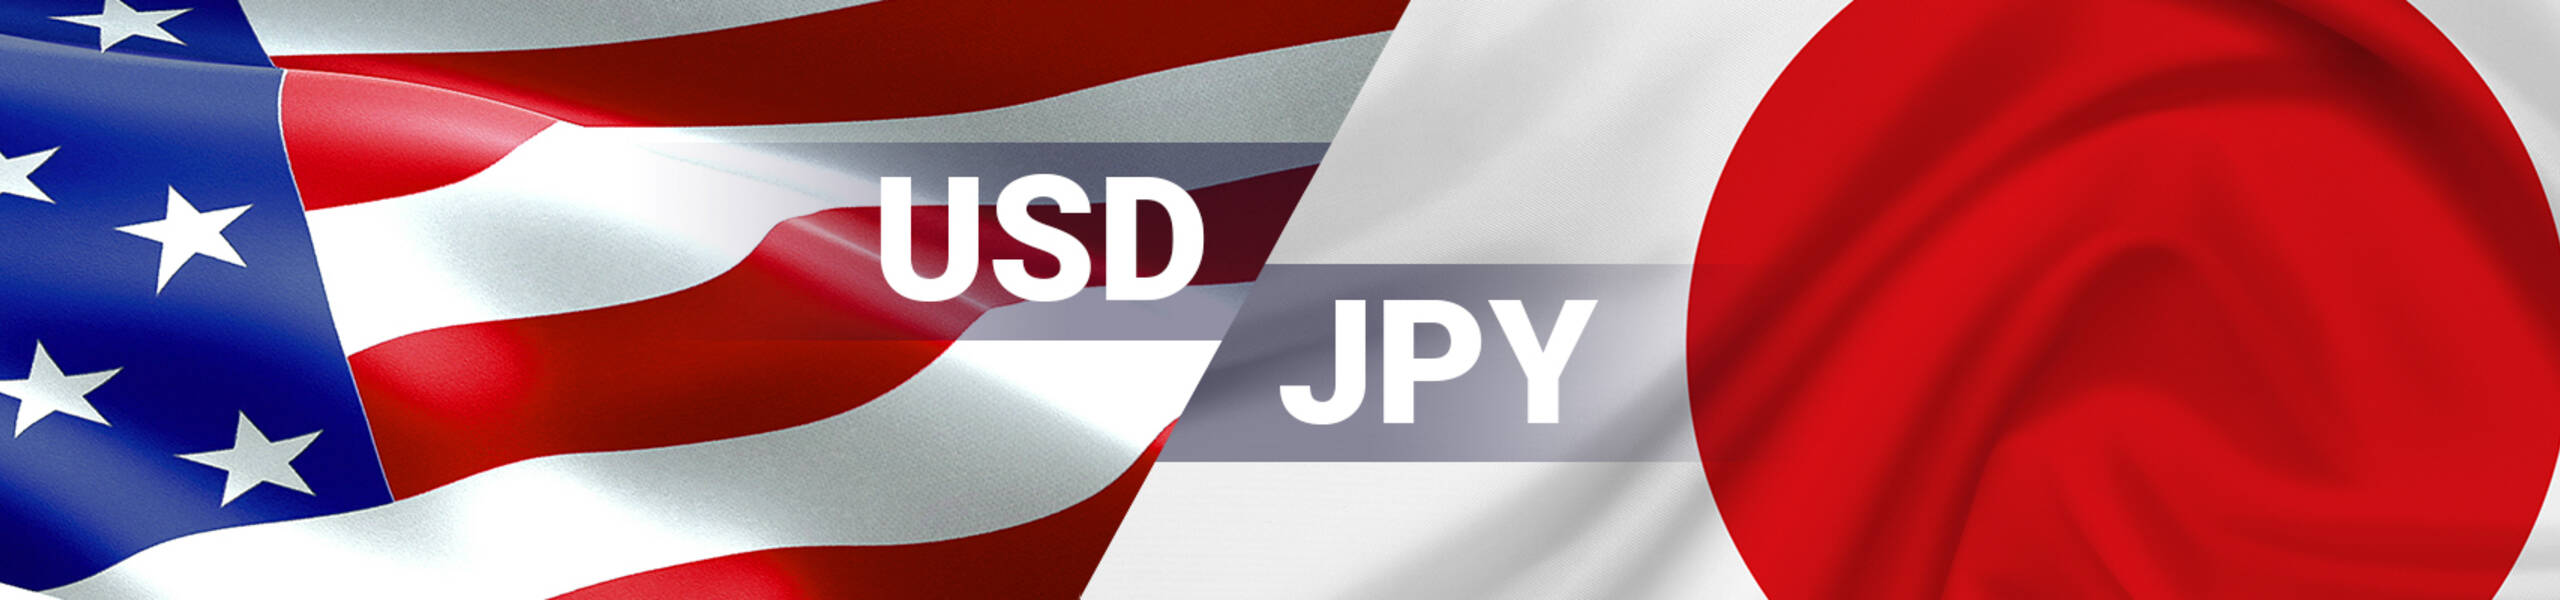 USD/JPY: Dollar entered into Cloudy area